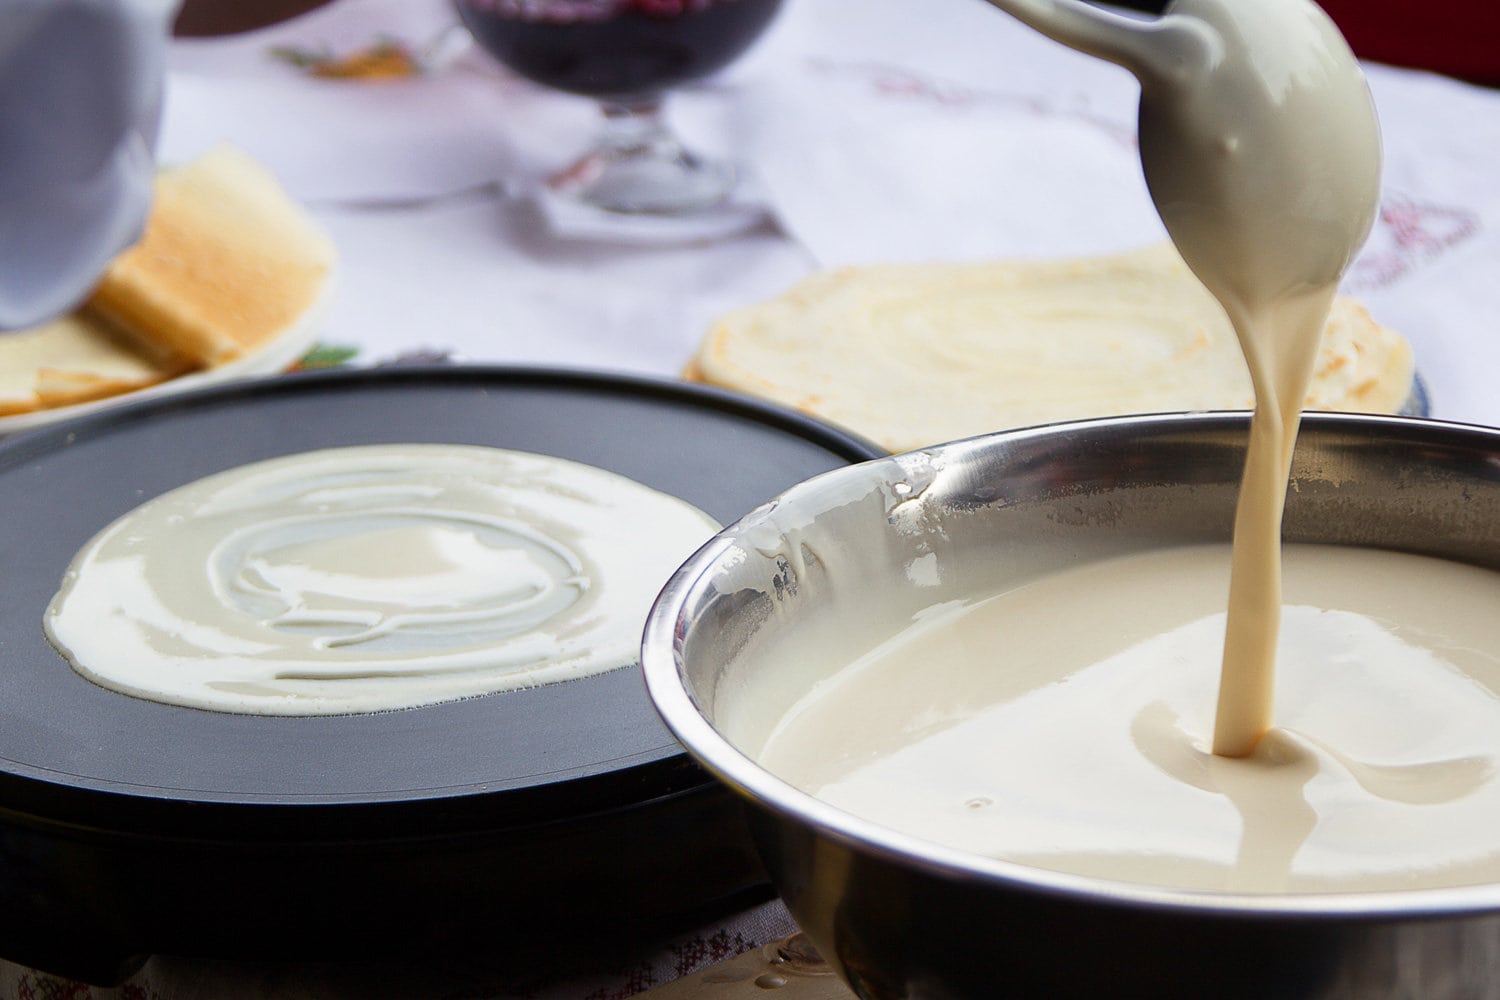 Pour batter for pancakes into a frying pan.